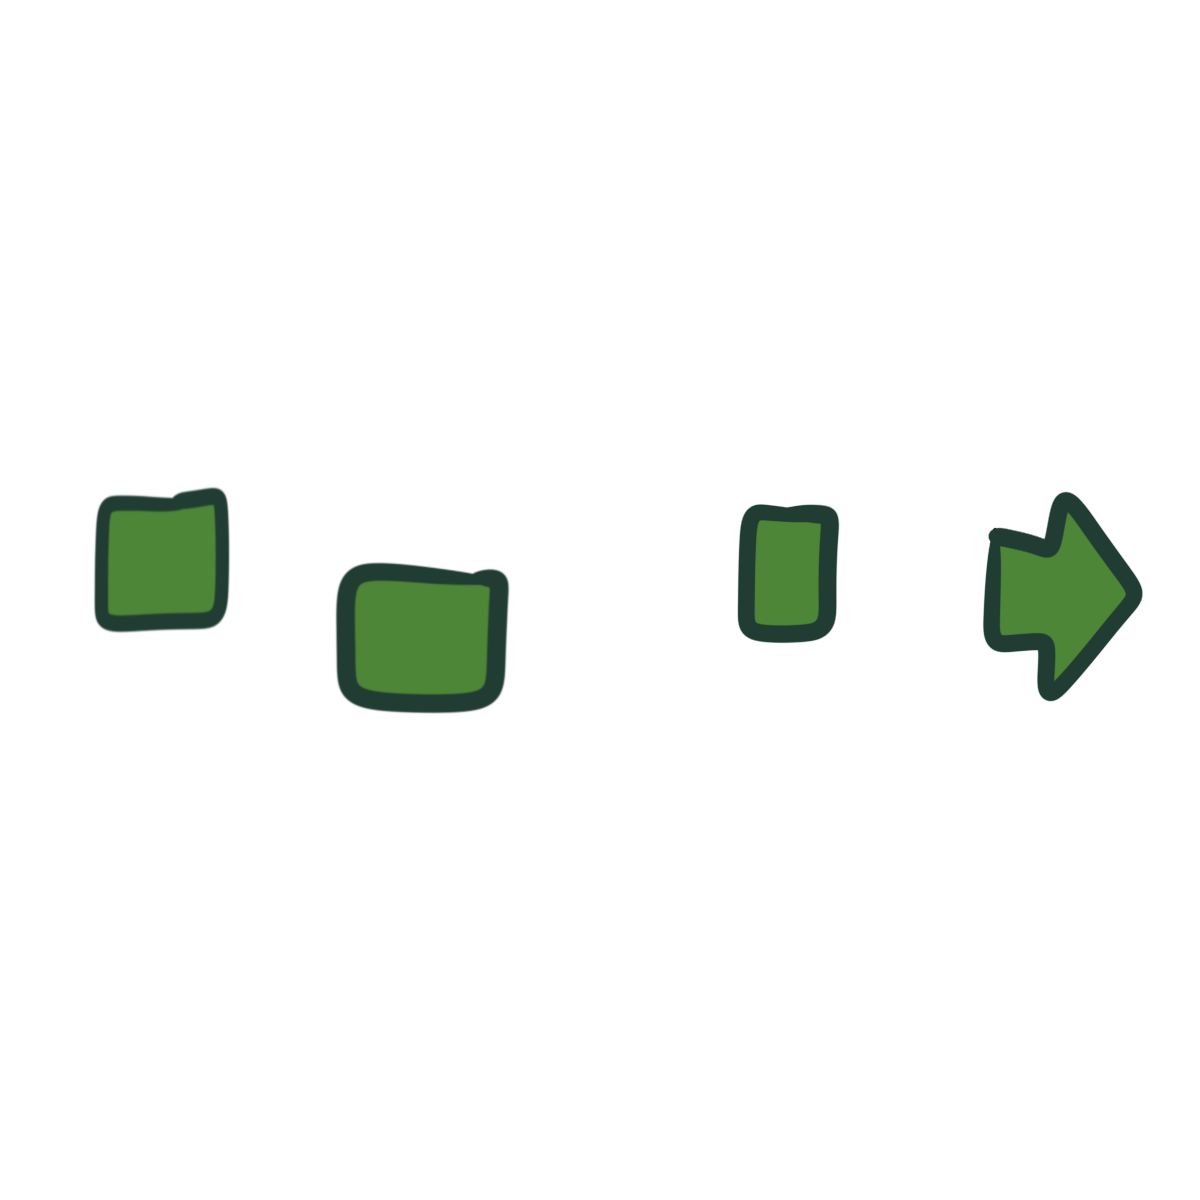 A green arrow pointing right is broken into four offset sections with large gaps between them.